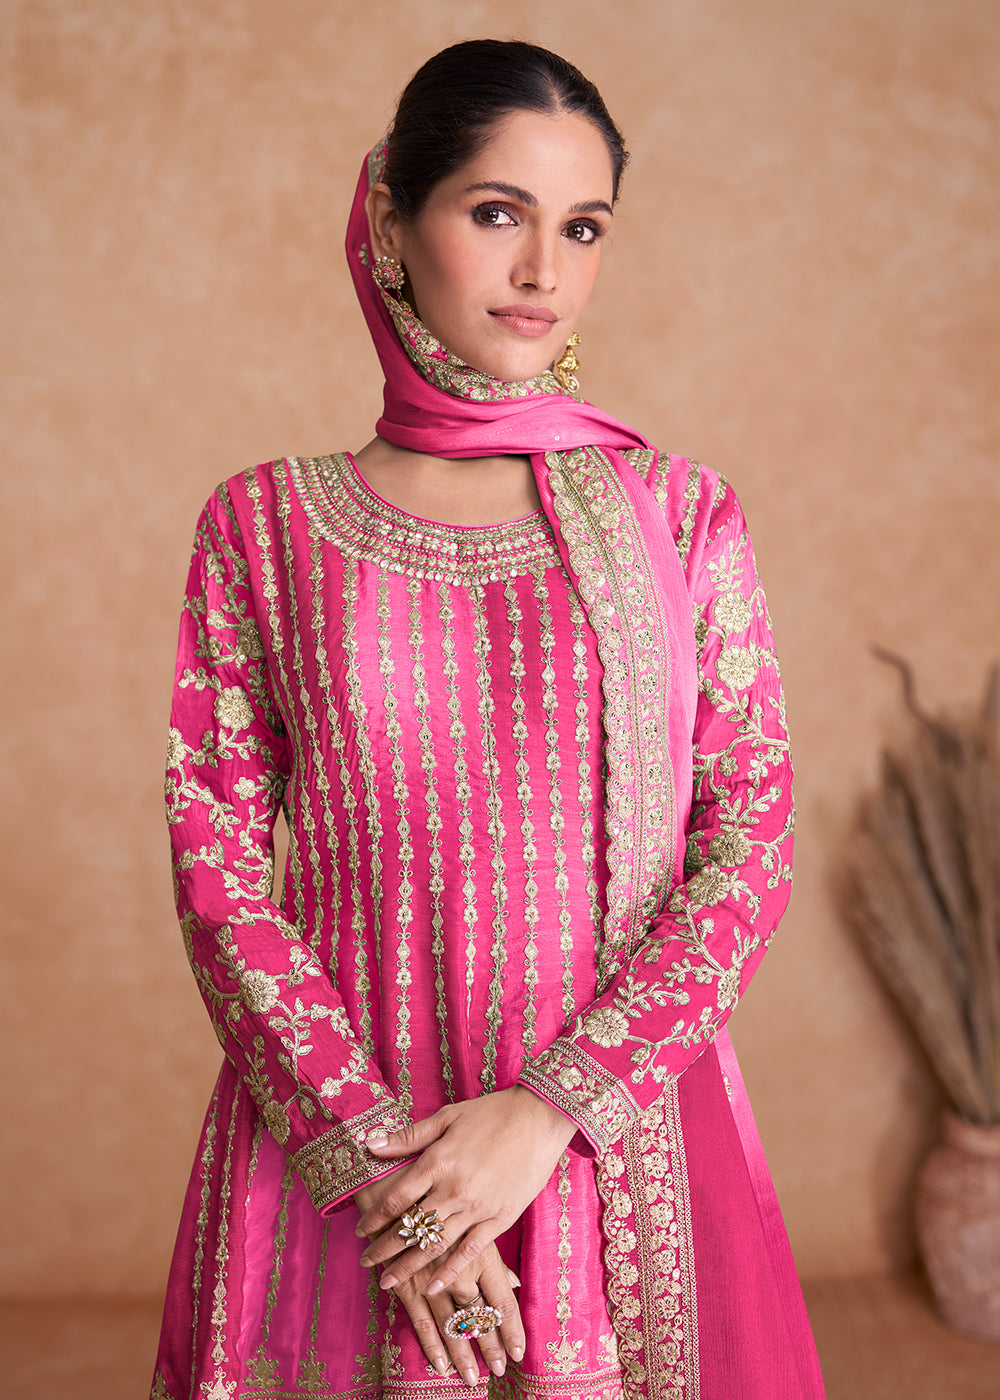 Shop Now Traditional Pink Embroidered Wedding & Reception Wear Gharara Suit Online at Empress Clothing in USA, UK, Canada, Italy & Worldwide.